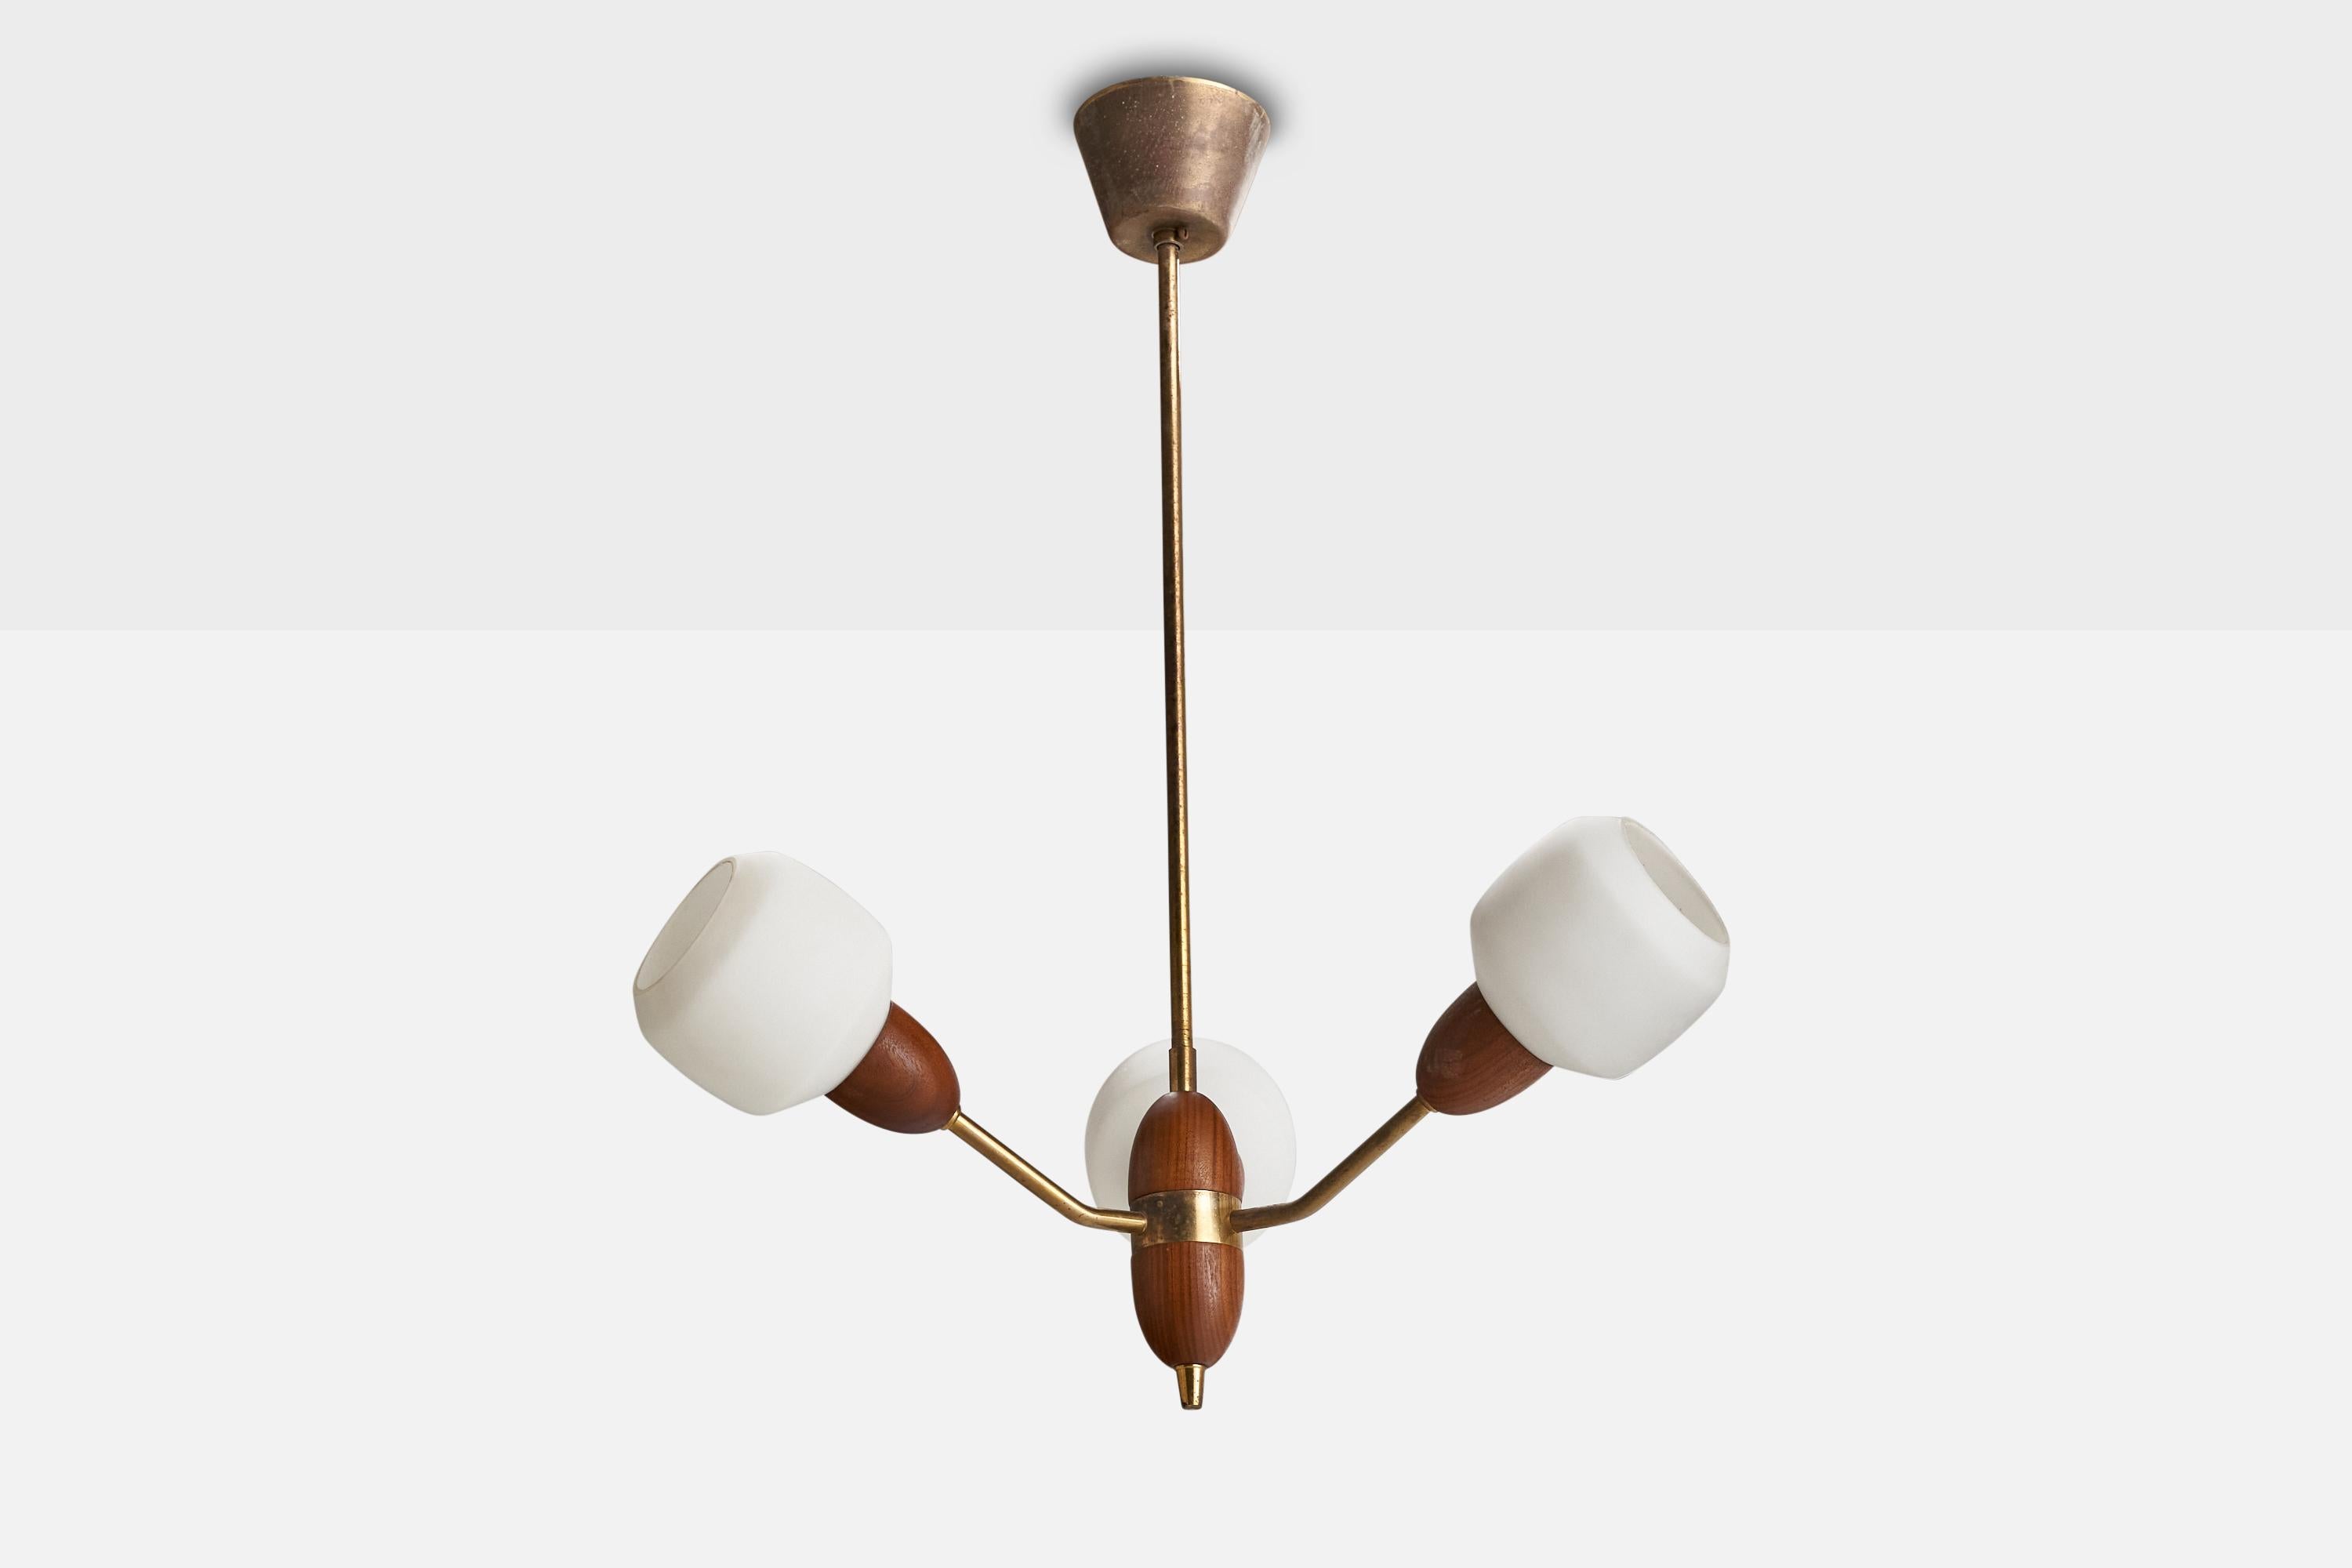 A brass, teak and opaline glass chandelier designed and produced in Sweden, c. 1950s.

Dimensions of canopy (inches): 2.67” H x 3.54” Diameter
Socket takes standard E-14 bulbs. 3 socket.There is no maximum wattage stated on the fixture. All lighting